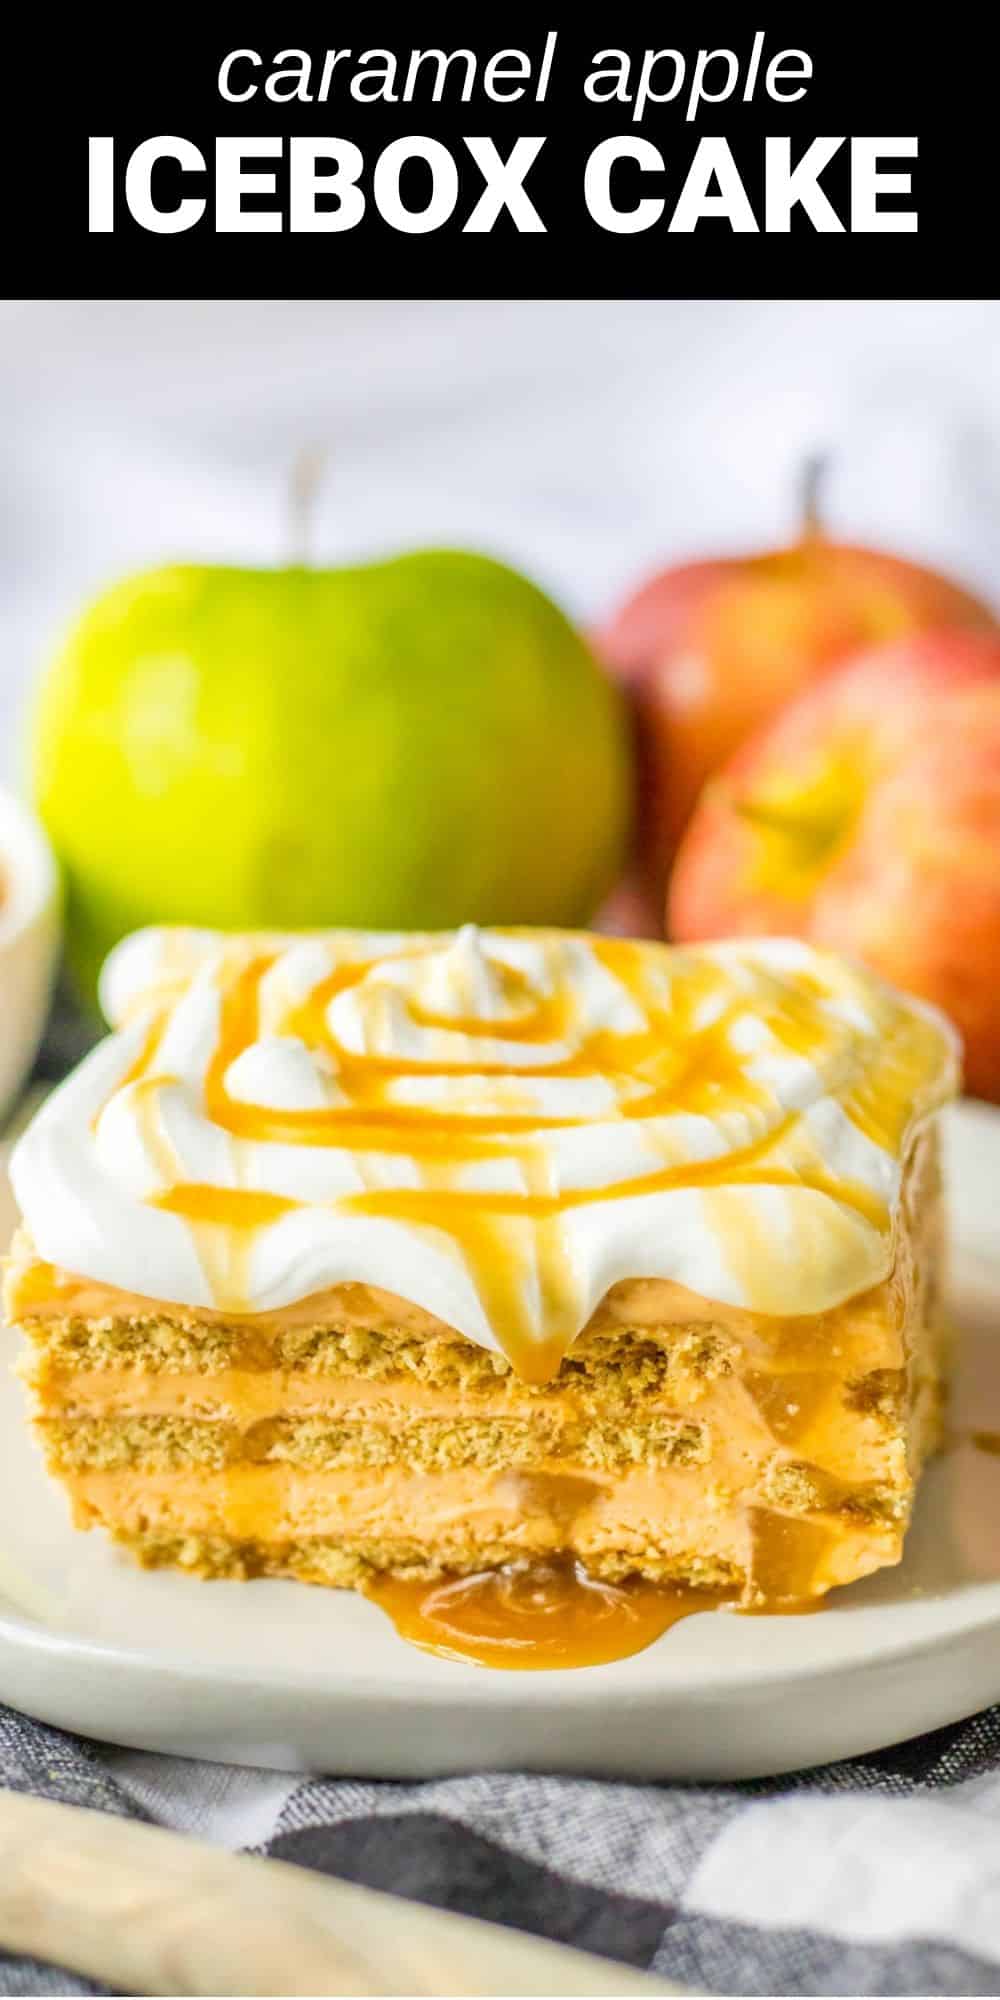 This delightfully decadent Caramel Apple Icebox Cake features layers of cinnamon graham crackers and a creamy apple filling, drizzled with a sweet caramel sauce. And the best part is, this is an easy, no bake dessert that only takes minutes to prepare.  